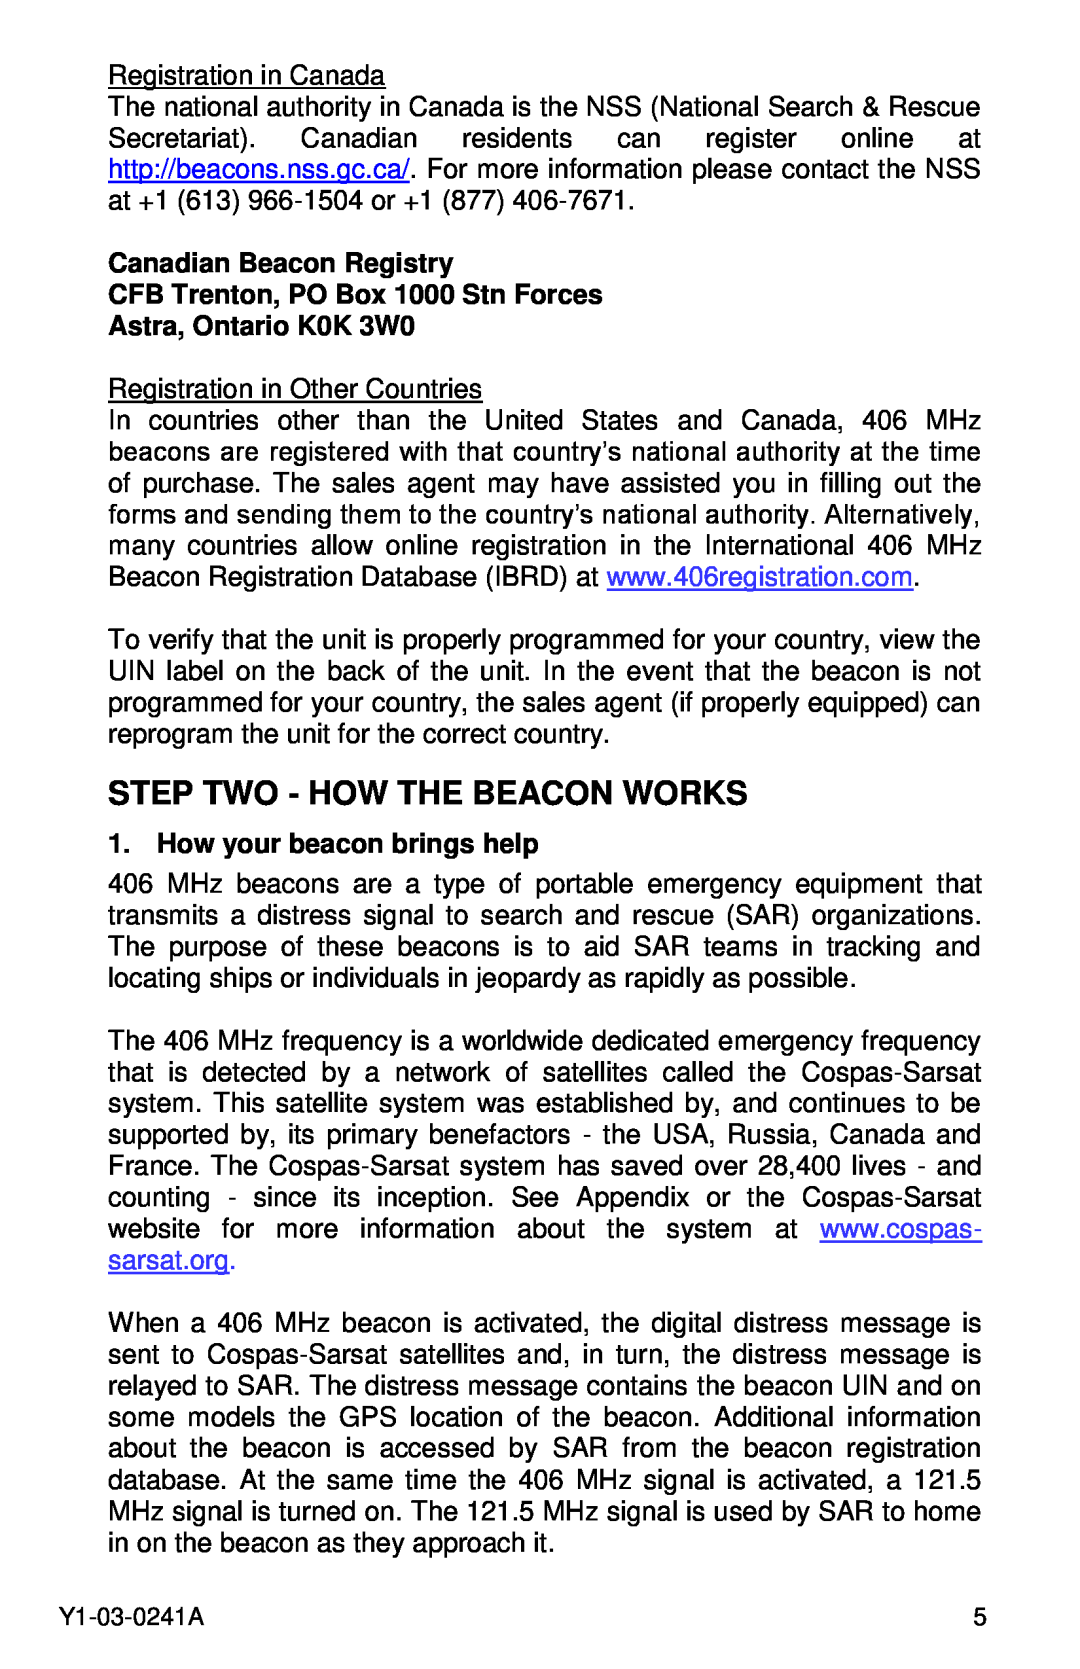 ACR Electronics 2883, 2882 Step Two - How The Beacon Works, Canadian Beacon Registry CFB Trenton, PO Box 1000 Stn Forces 